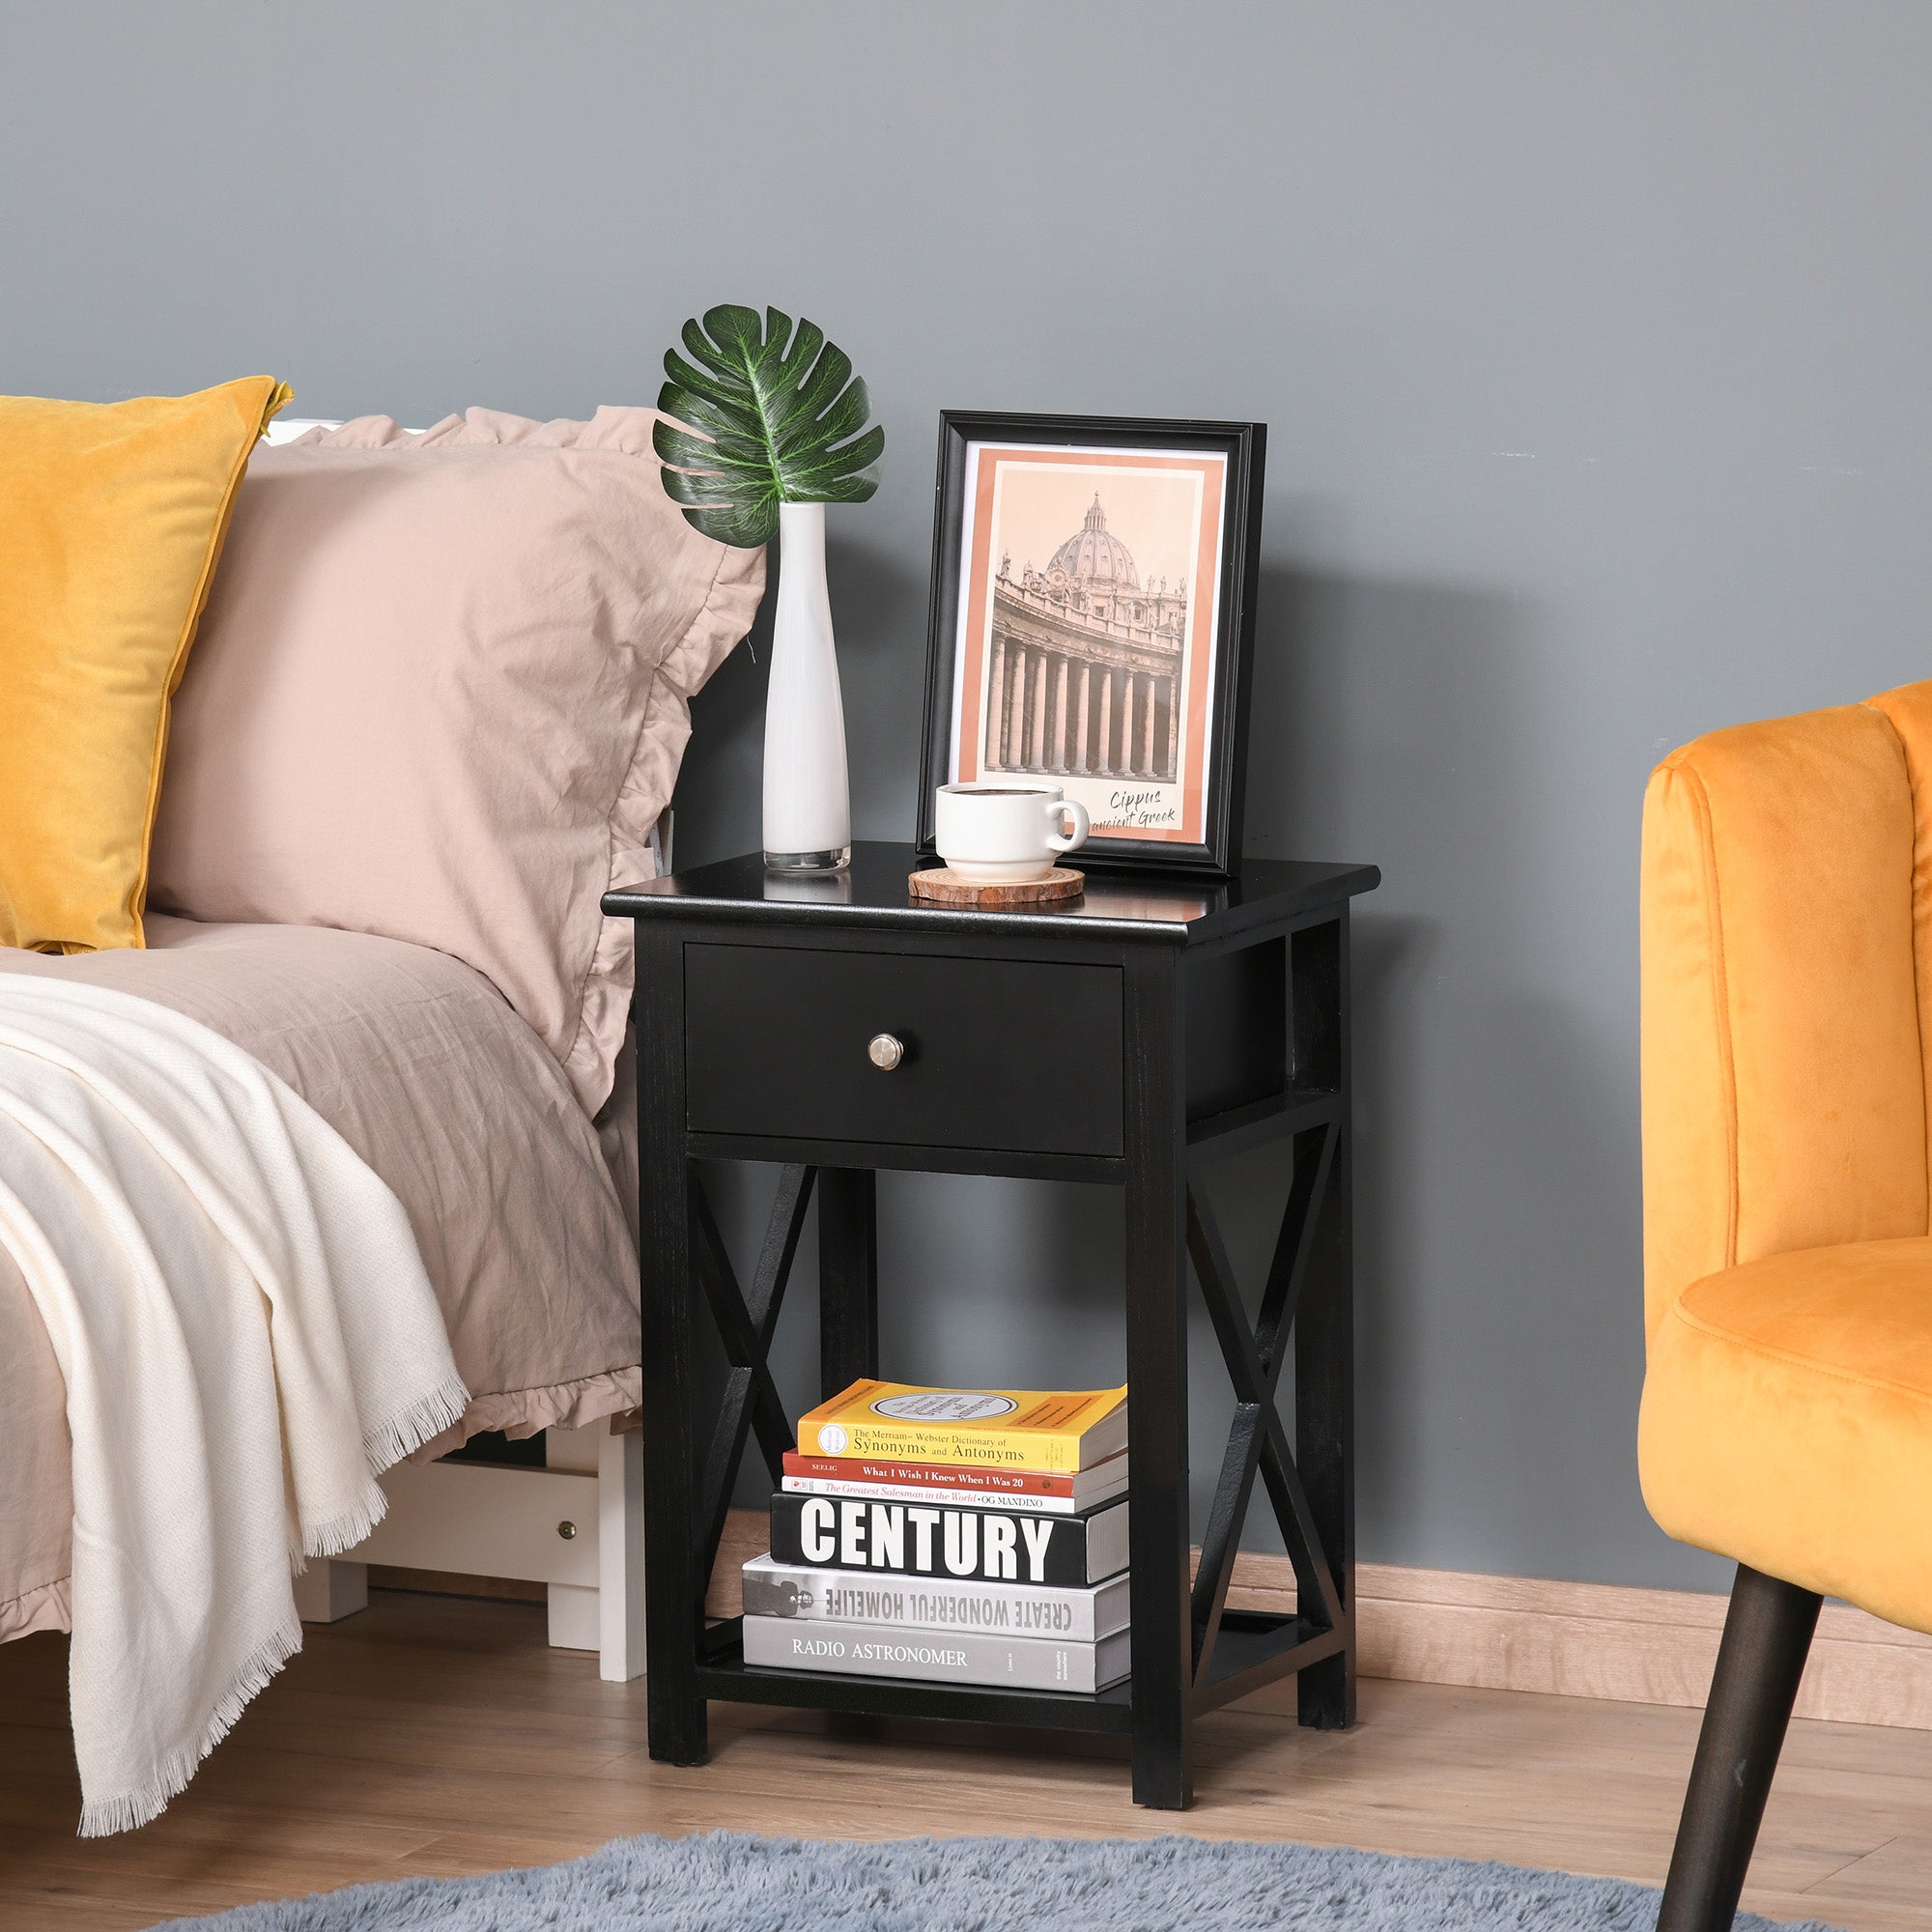 Traditional Accent End Table With 1 Drawer,X Bar Bottom Storage Shelf, for Living Room Bedroom Room 40L x 30W x 55H cm - Black-1